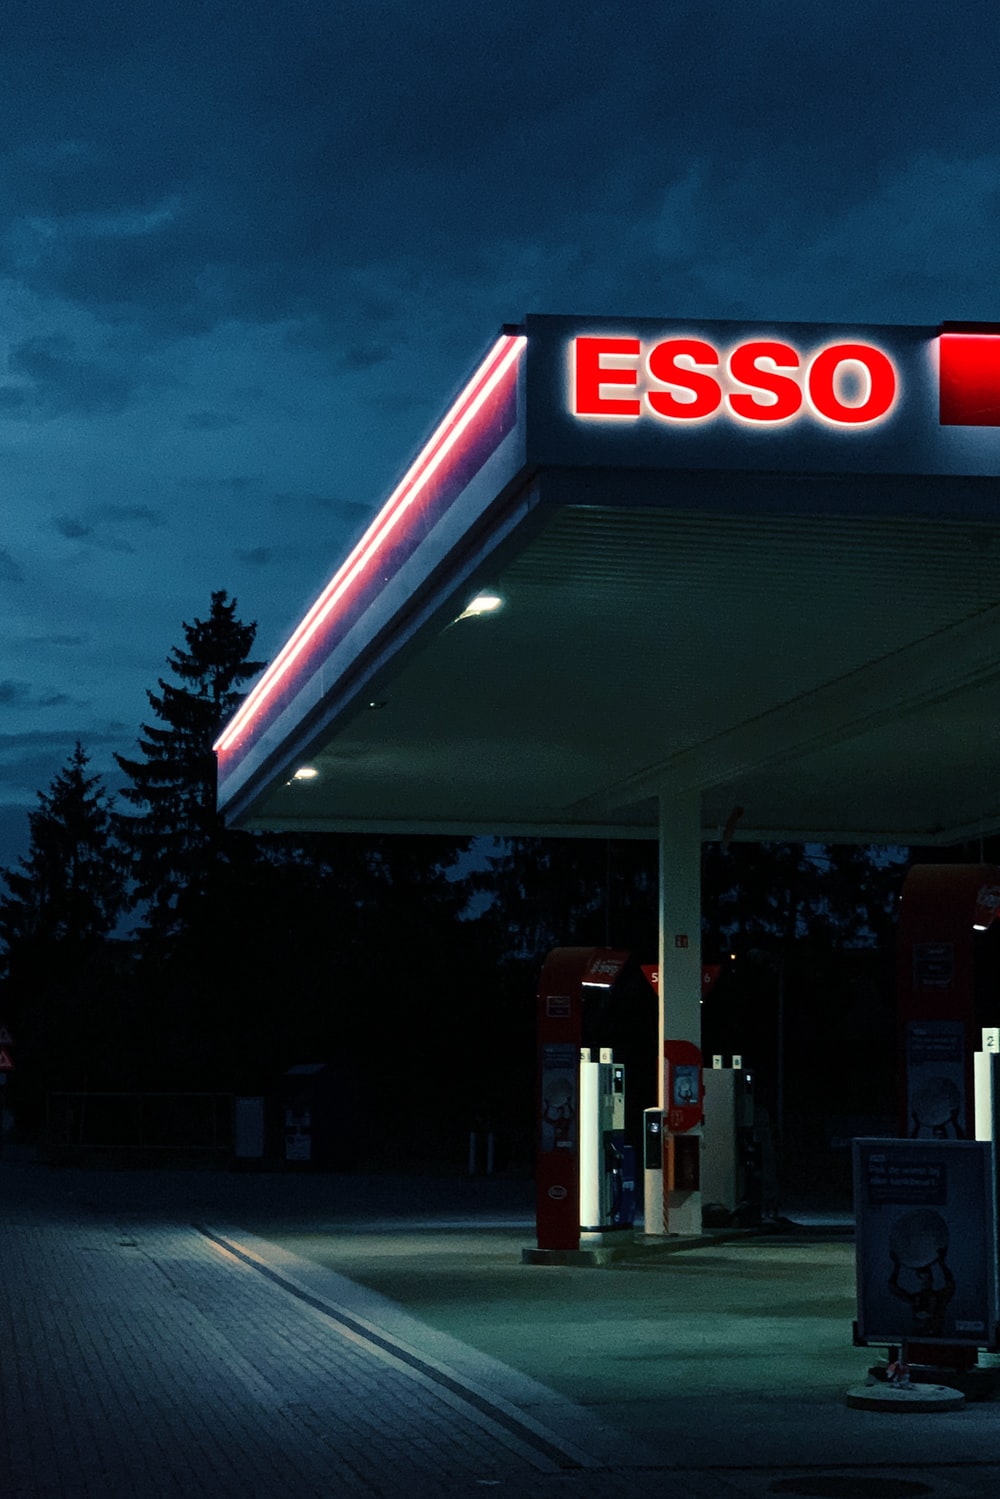 Esso gas station during night photo